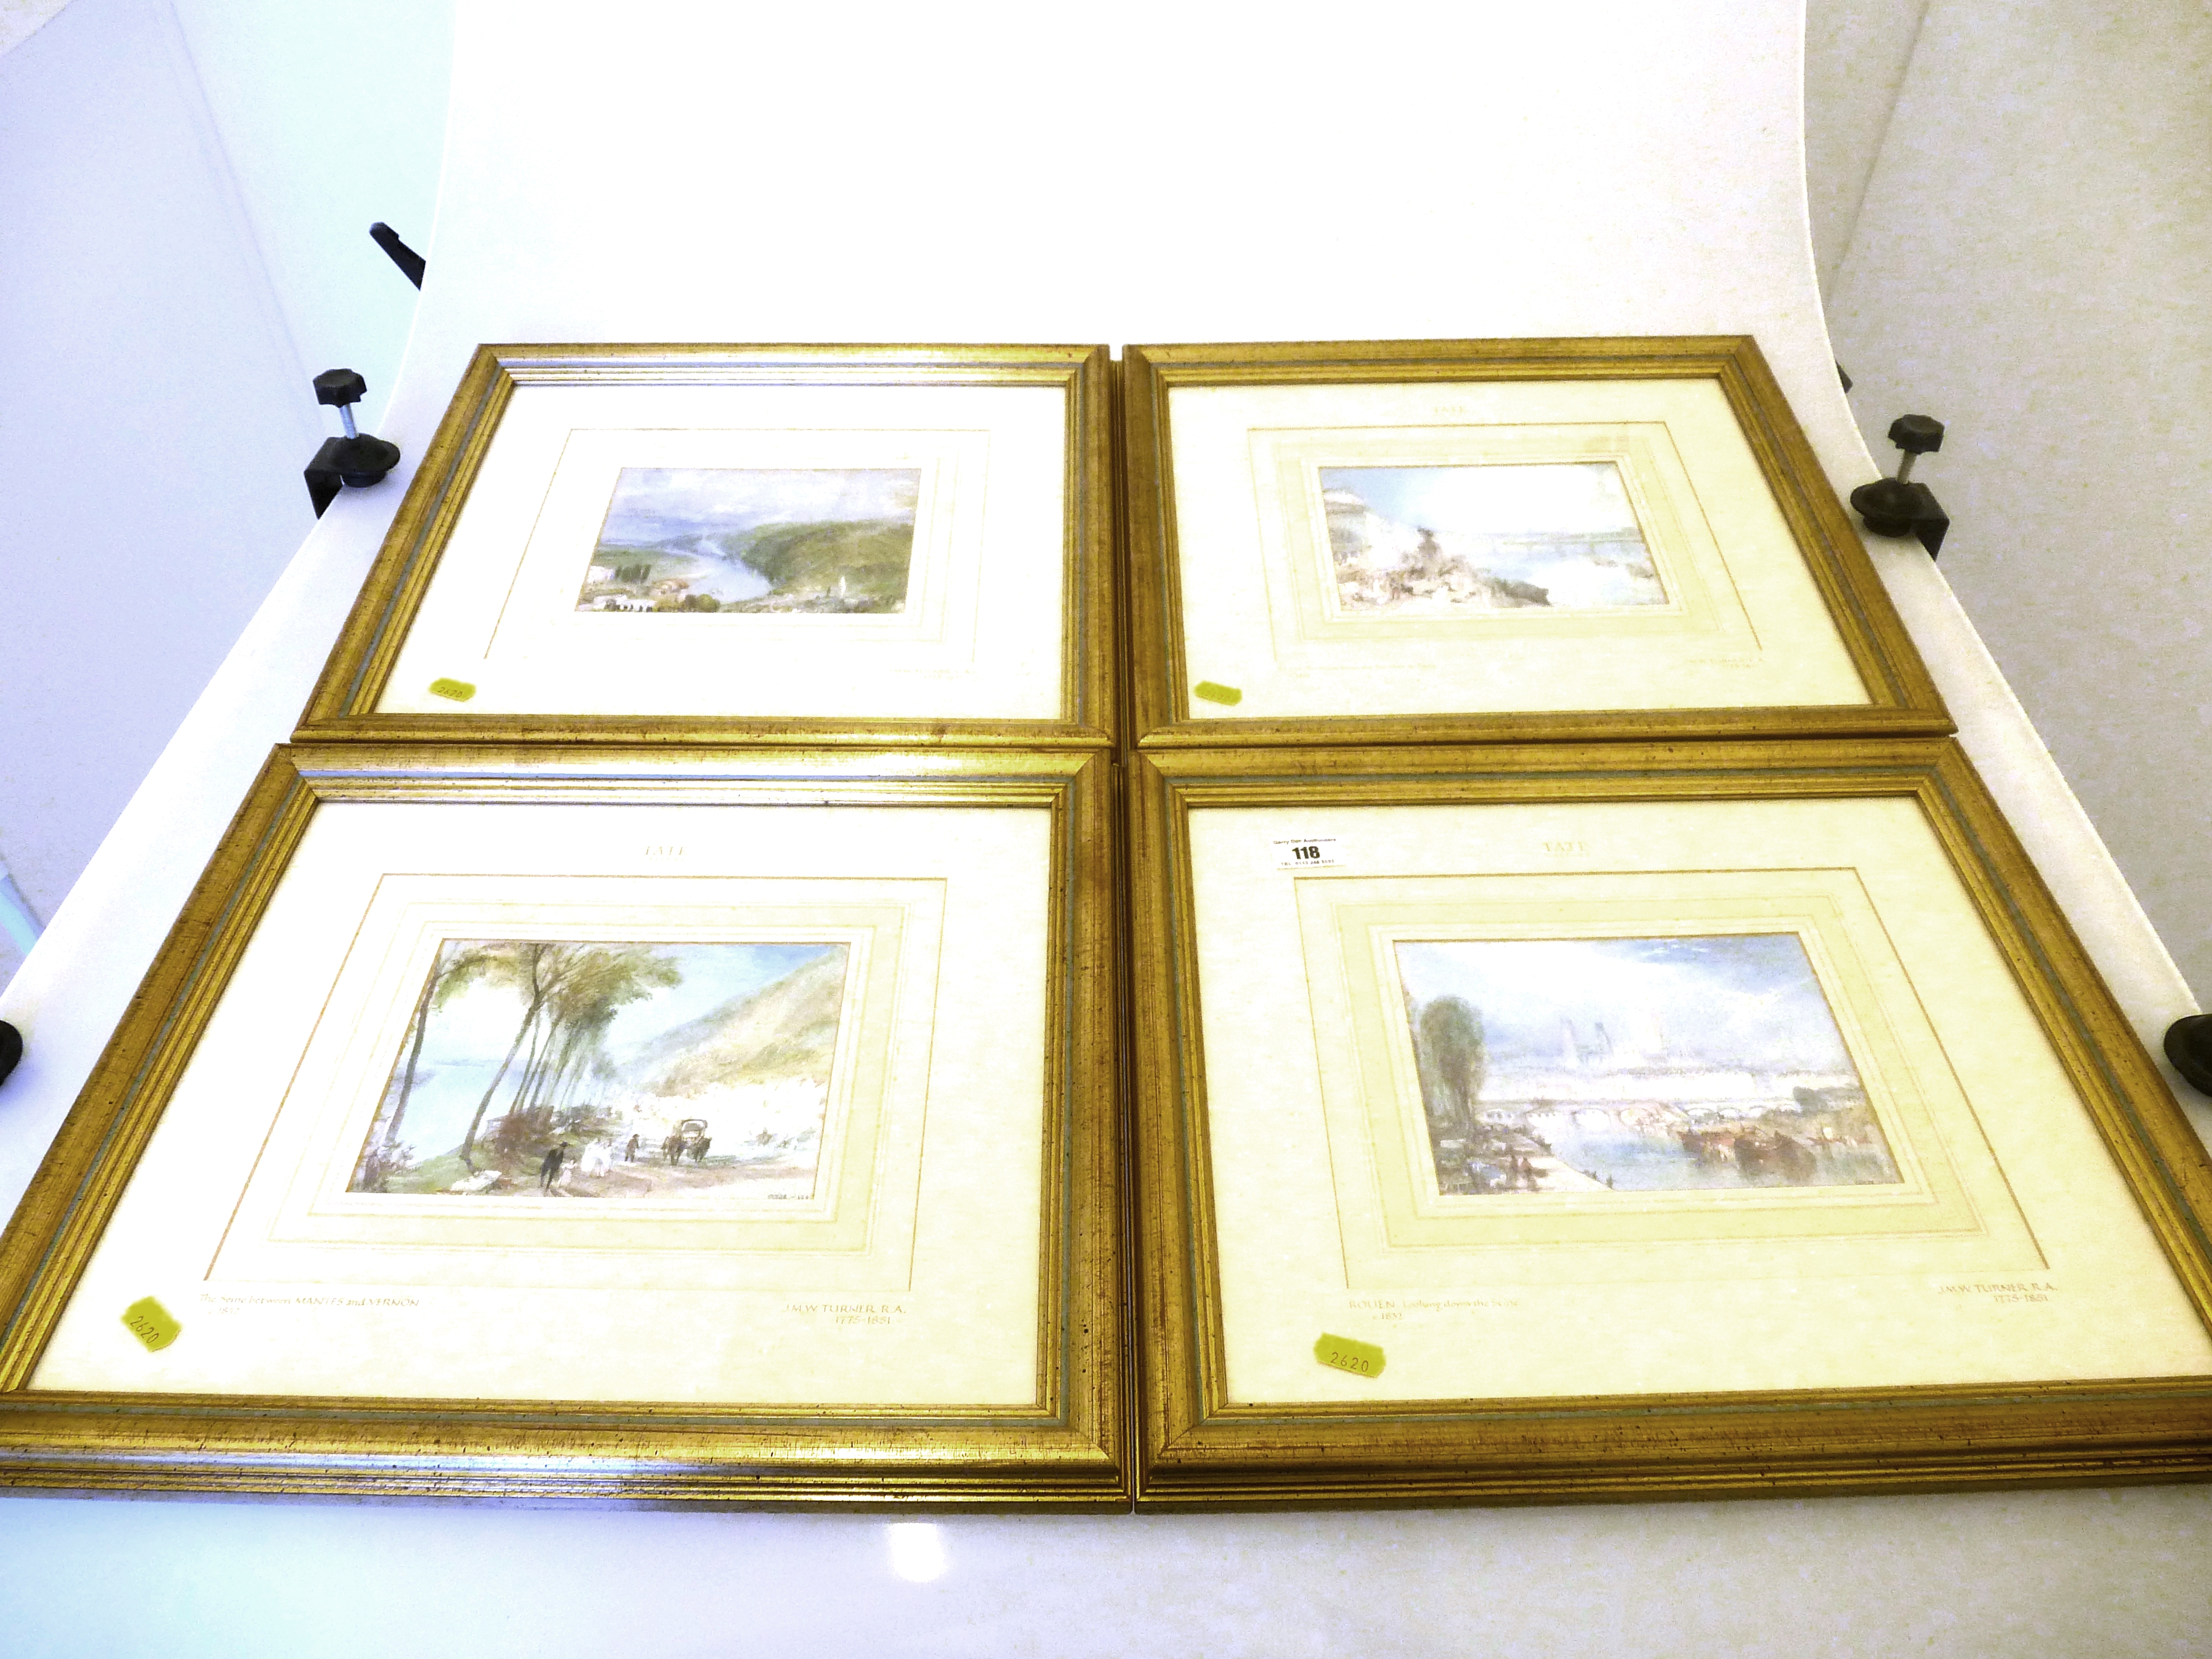 4 TATE GALLERY LIMITED EDITION J.M.W. TURNER 'WANDERINGS BY THE SEINE' PRINTS 908/5000 APPROX 5.